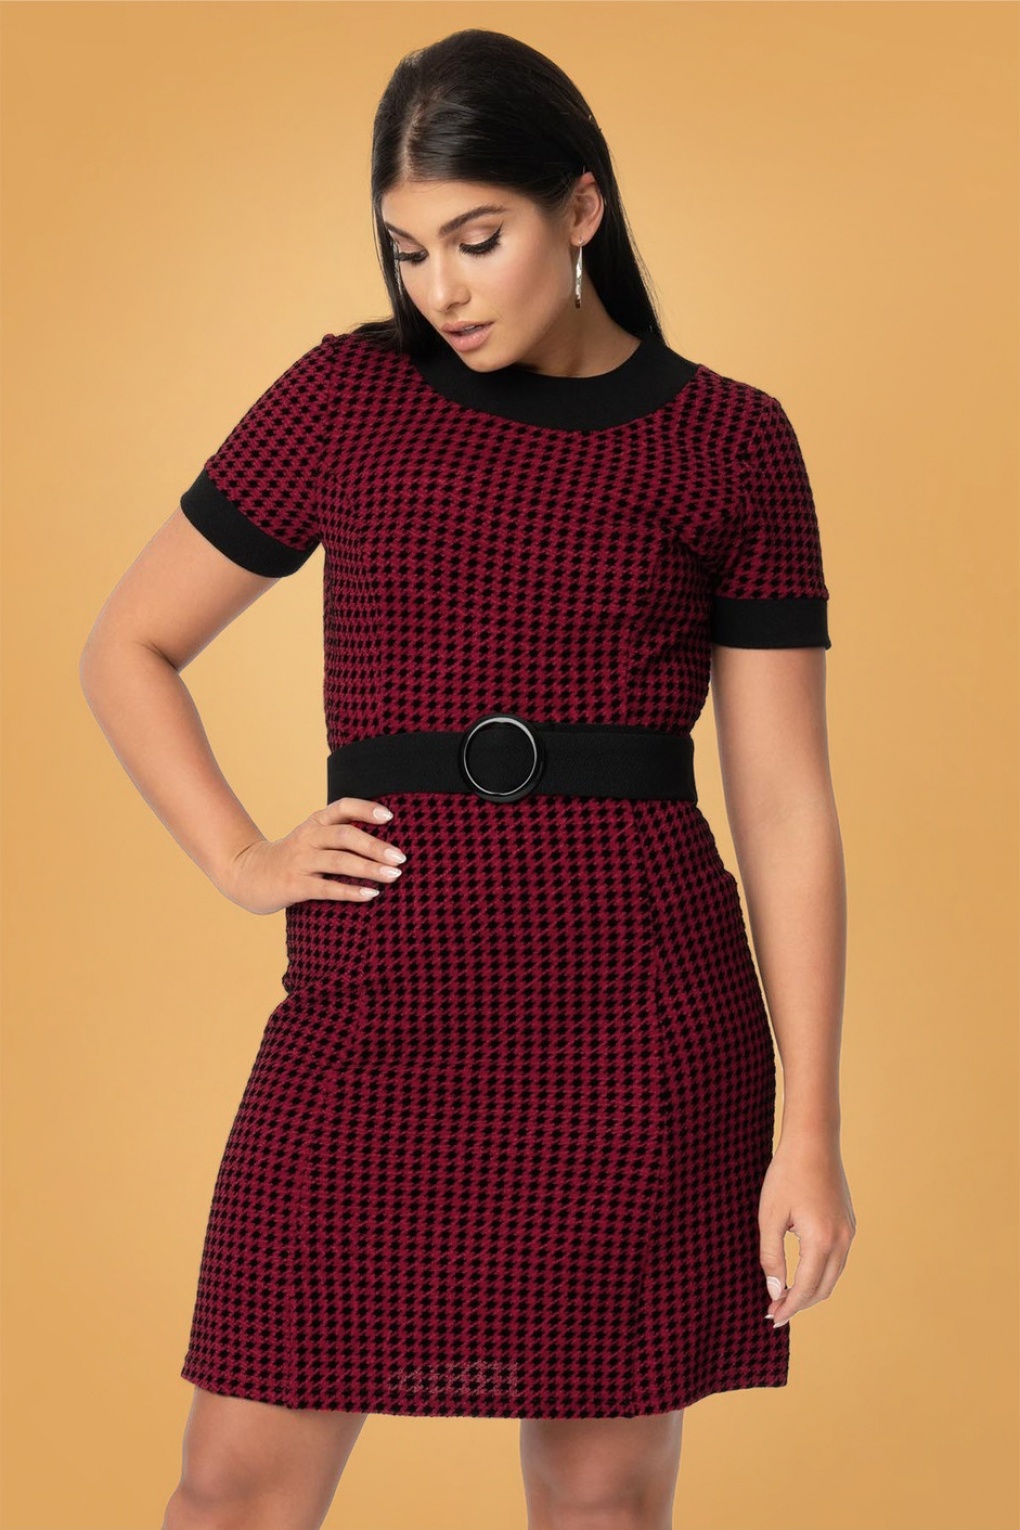 60s Smak Parlour Show Stealer Houndstooth Dress in Red and Black